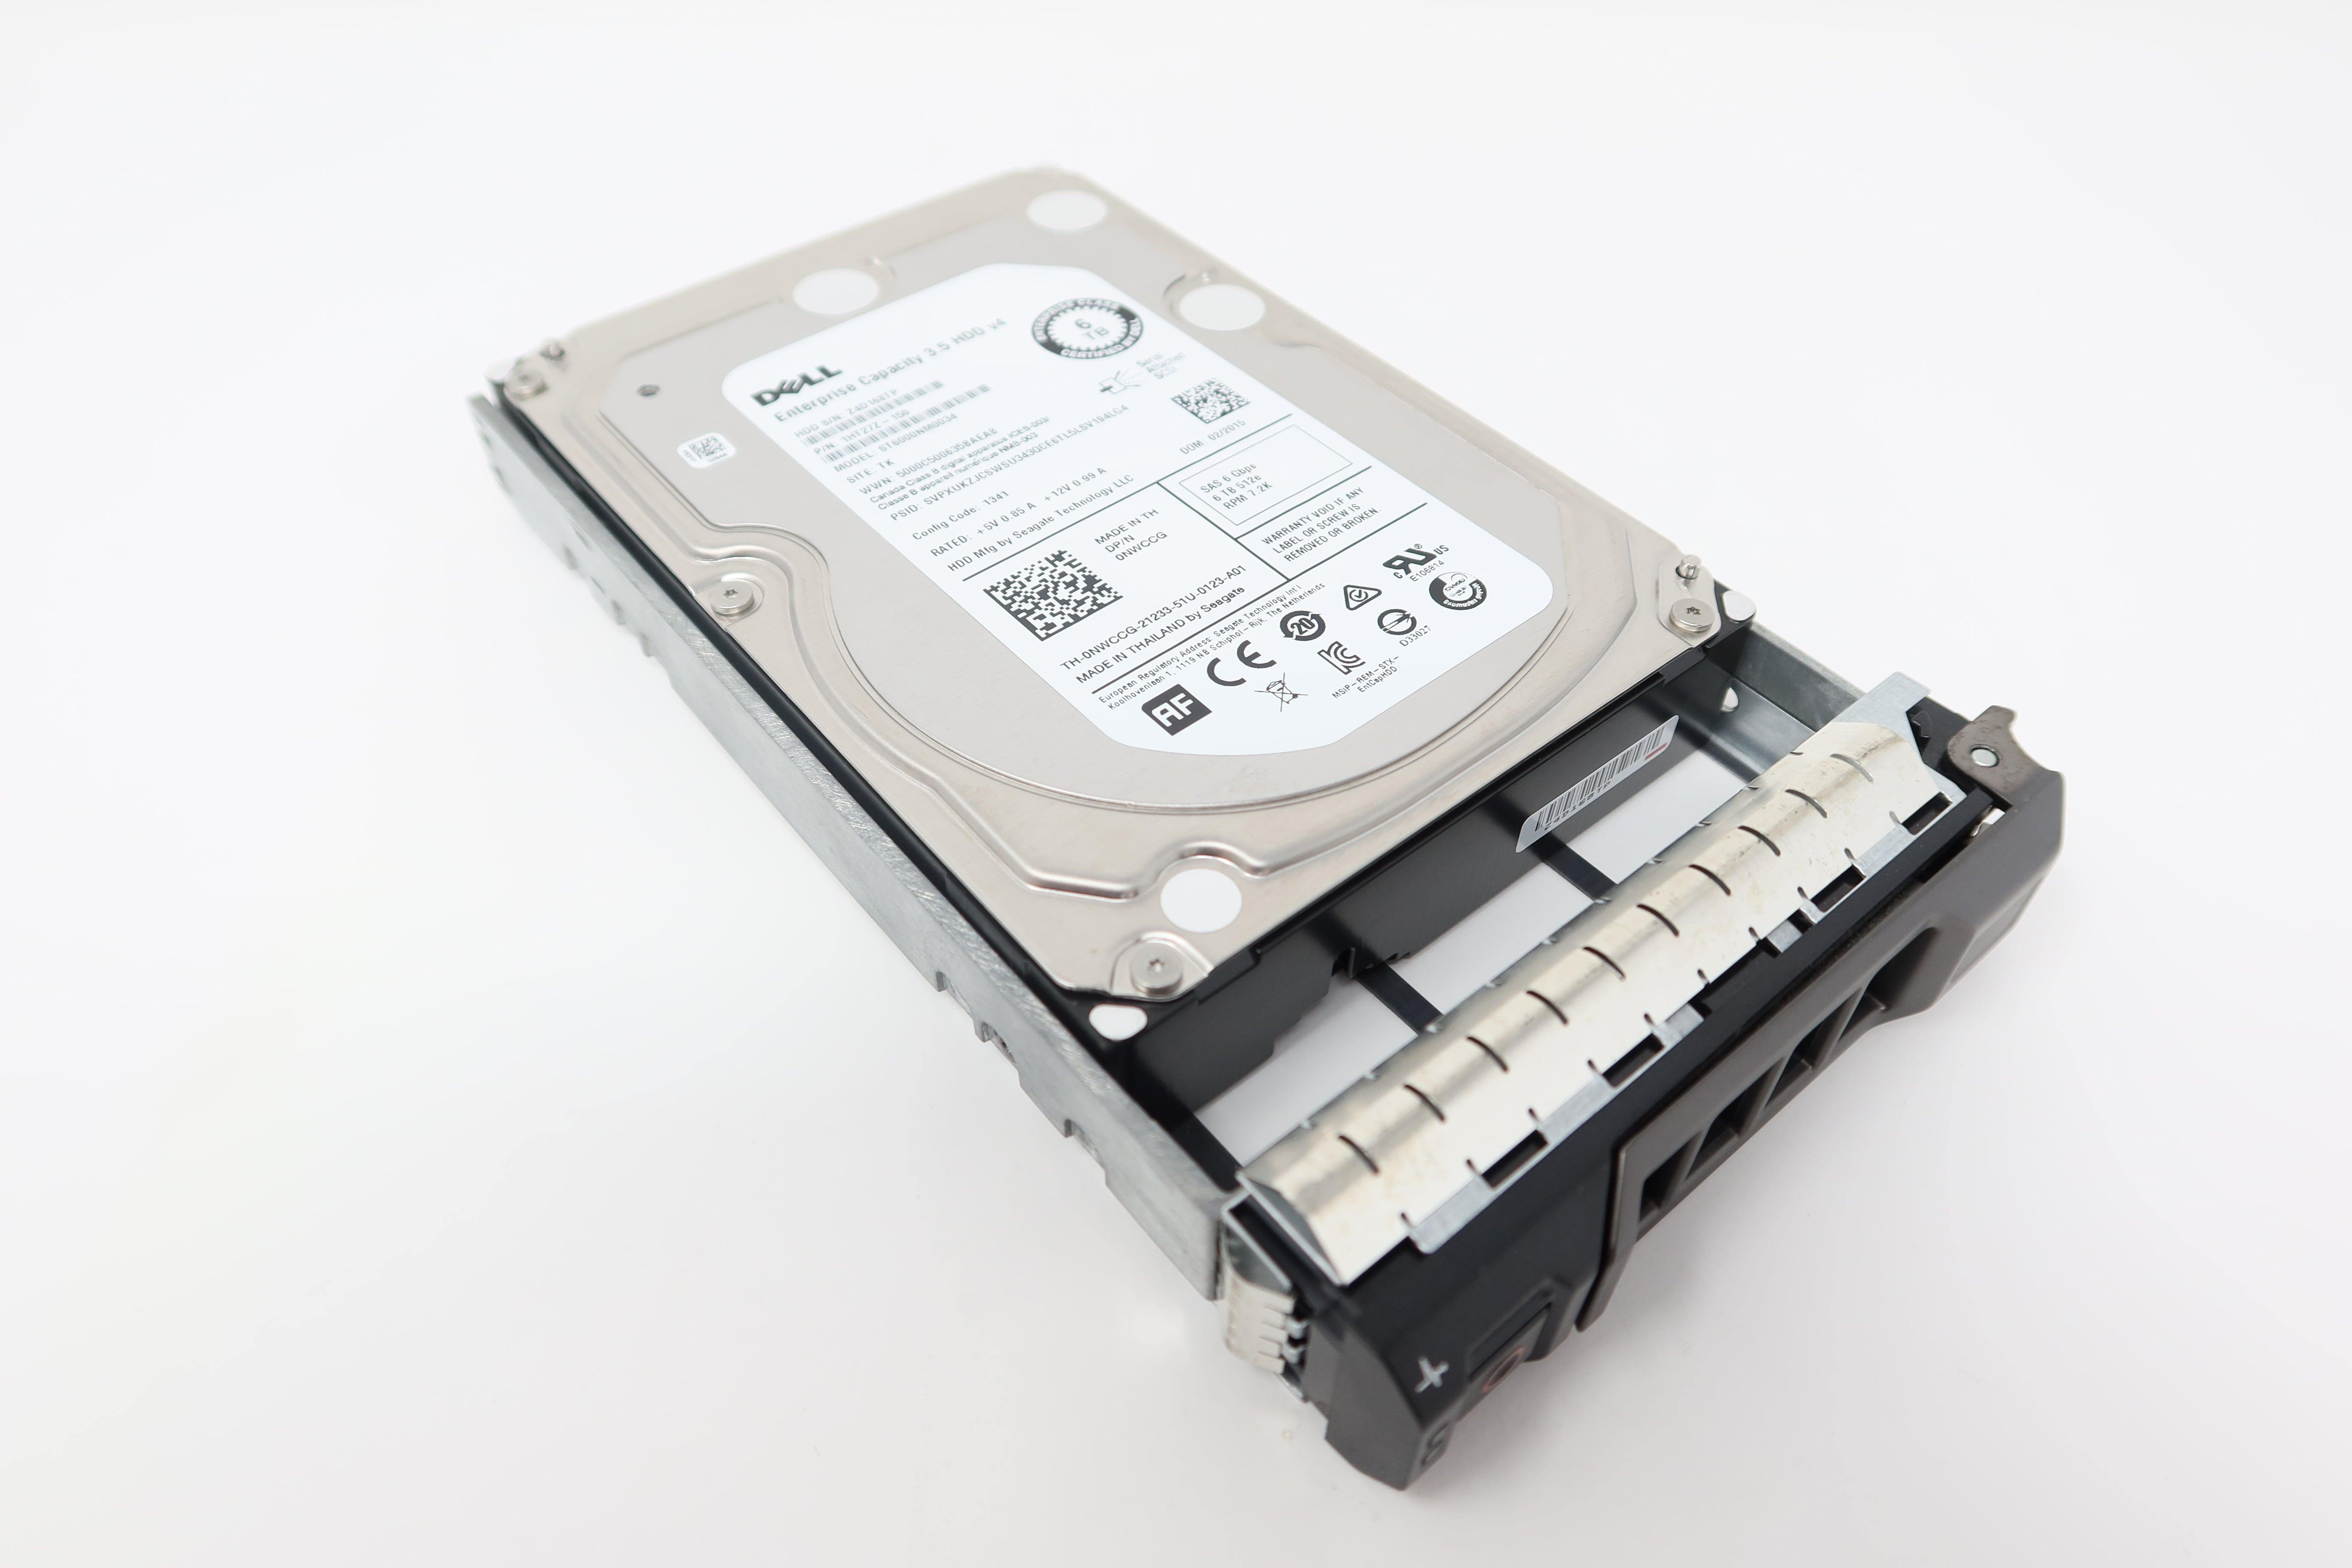 ST6000NM0034 Dell 6TB 7.2K 6G SAS 3.5IN (Lot of 5pc) NWCCG Drives